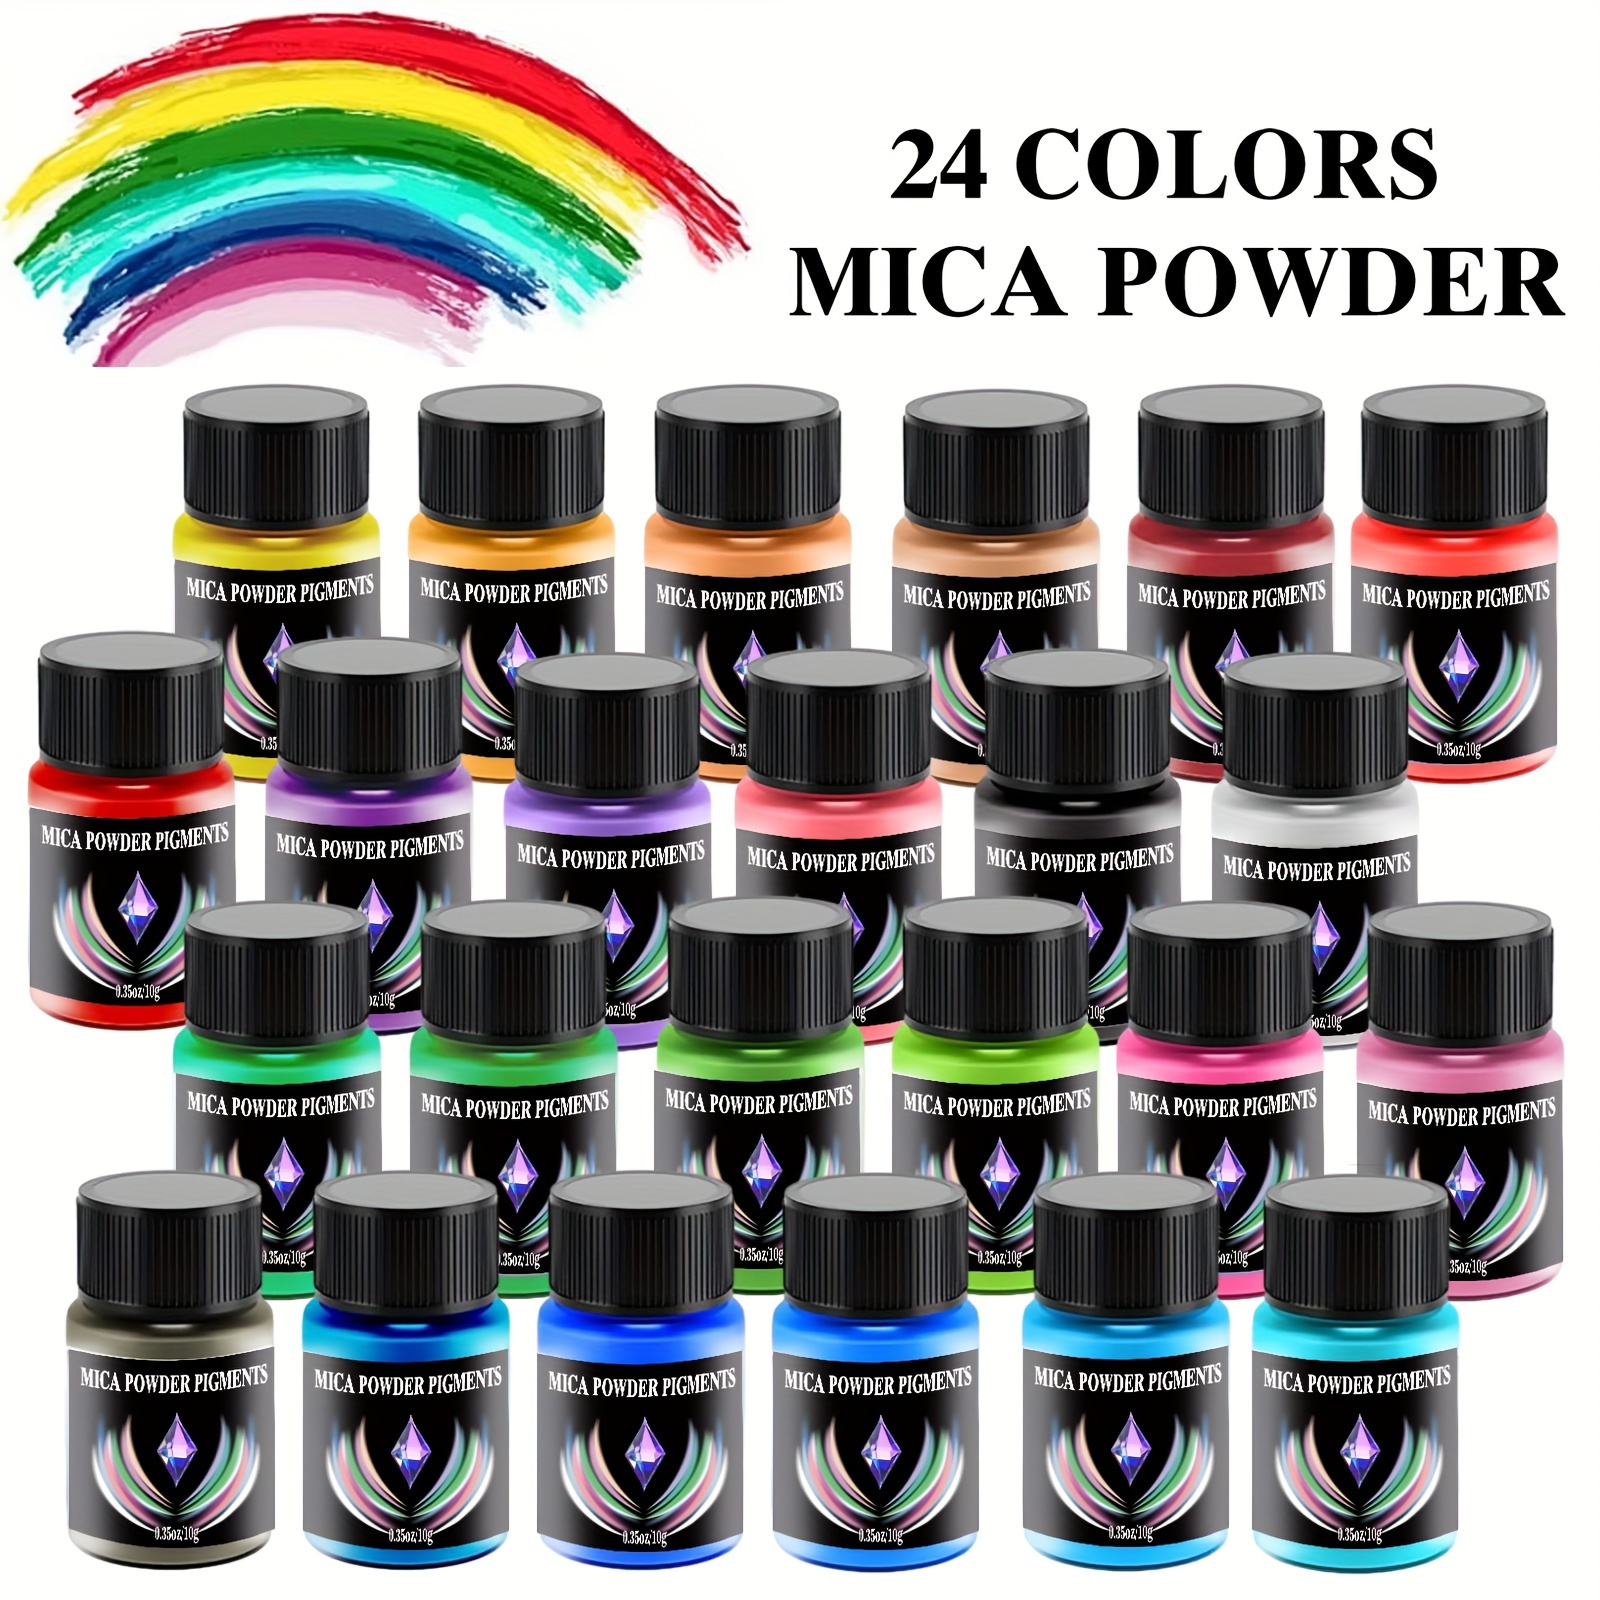 Mica Powder 15 Colors Pearl Powder Resin In Bottle Pigment Supplies For  Paint Soap Making Bath Bomb Diy Artist Craft Projects Fine Arts 10g 0 35oz, Today's Best Daily Deals